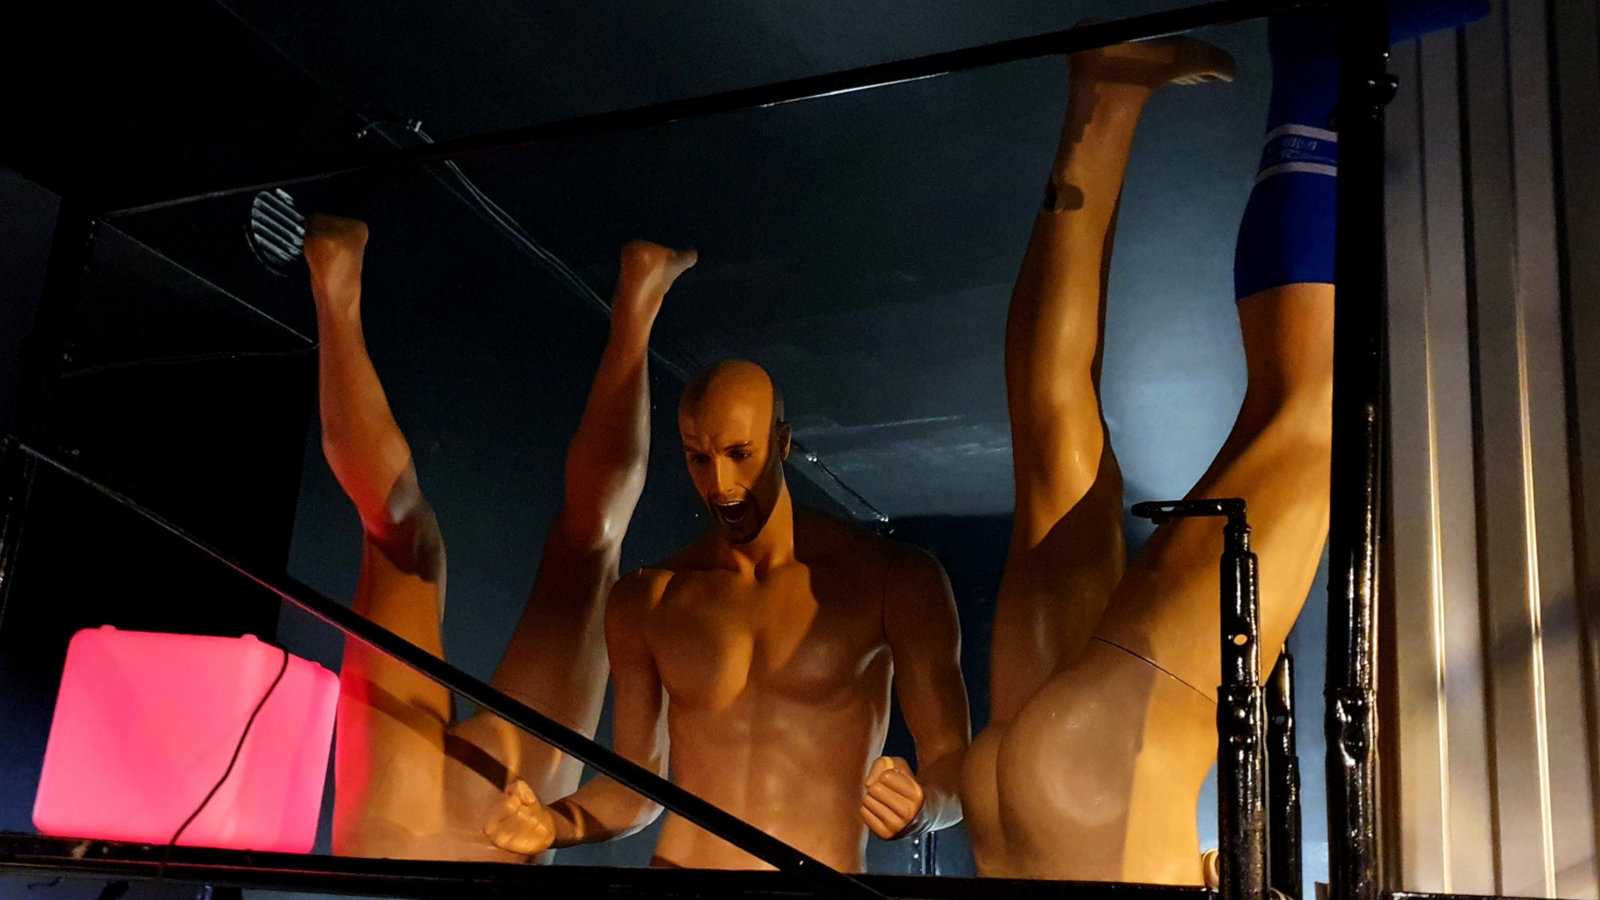 Bunker is a gay cruising bar in Riga that's quirky and naughty